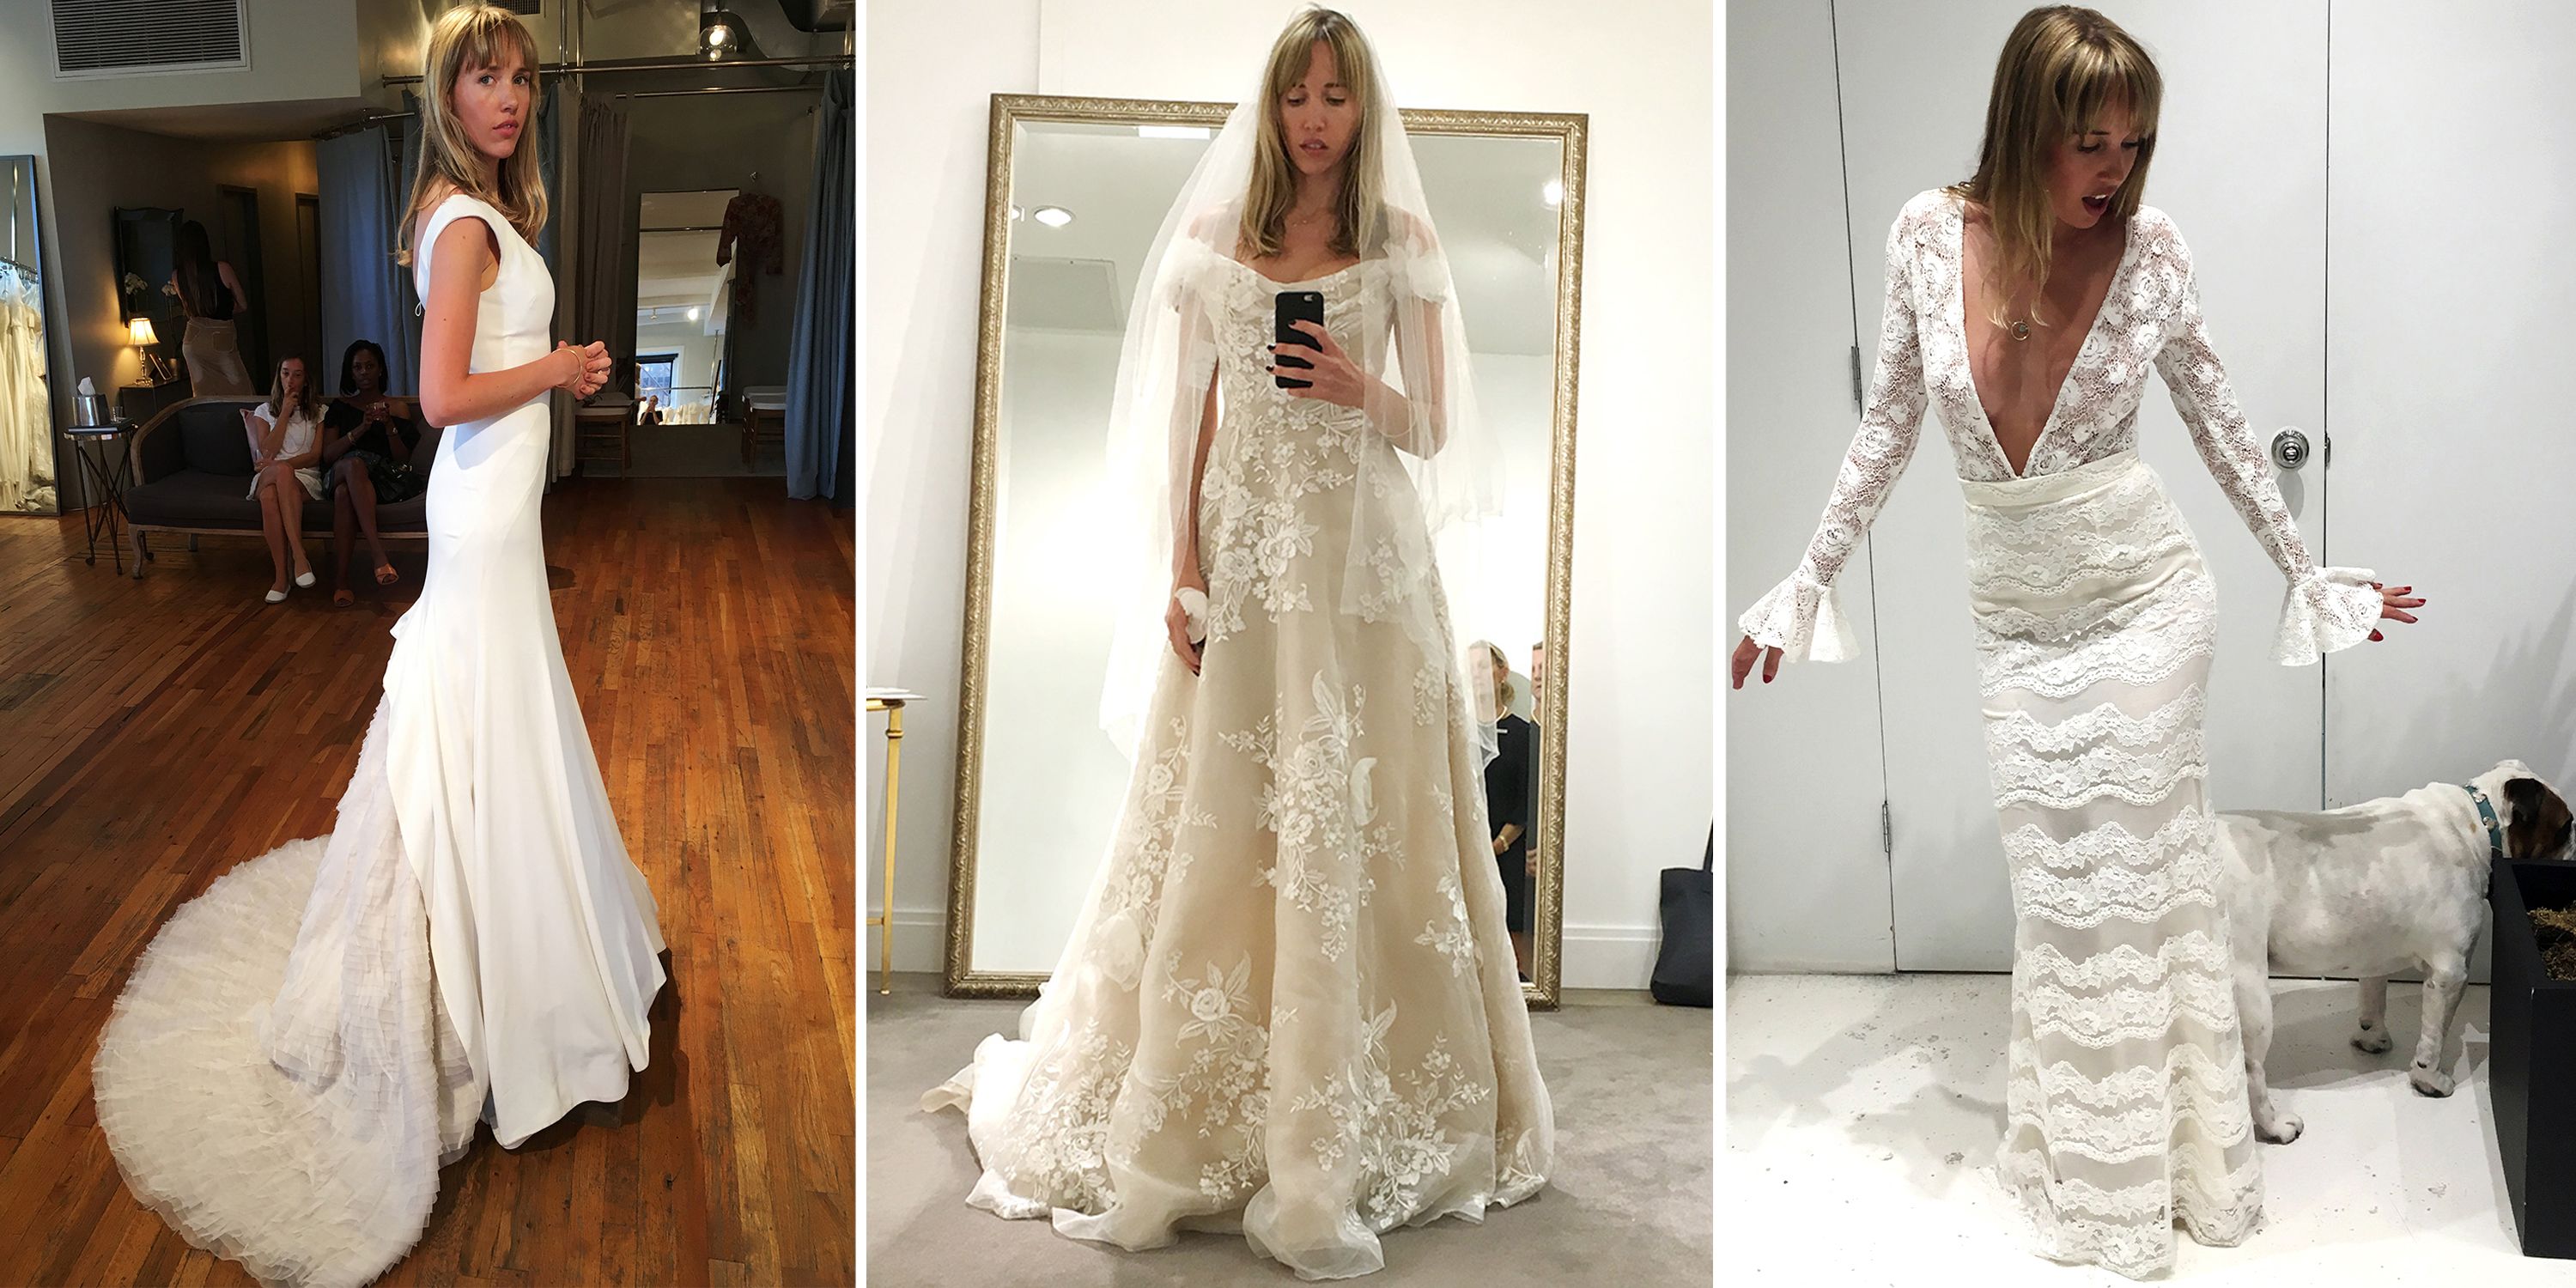 Finding Your Dream Wedding Dress - I Tried on 80 Bridal Gowns to Find My  Dress